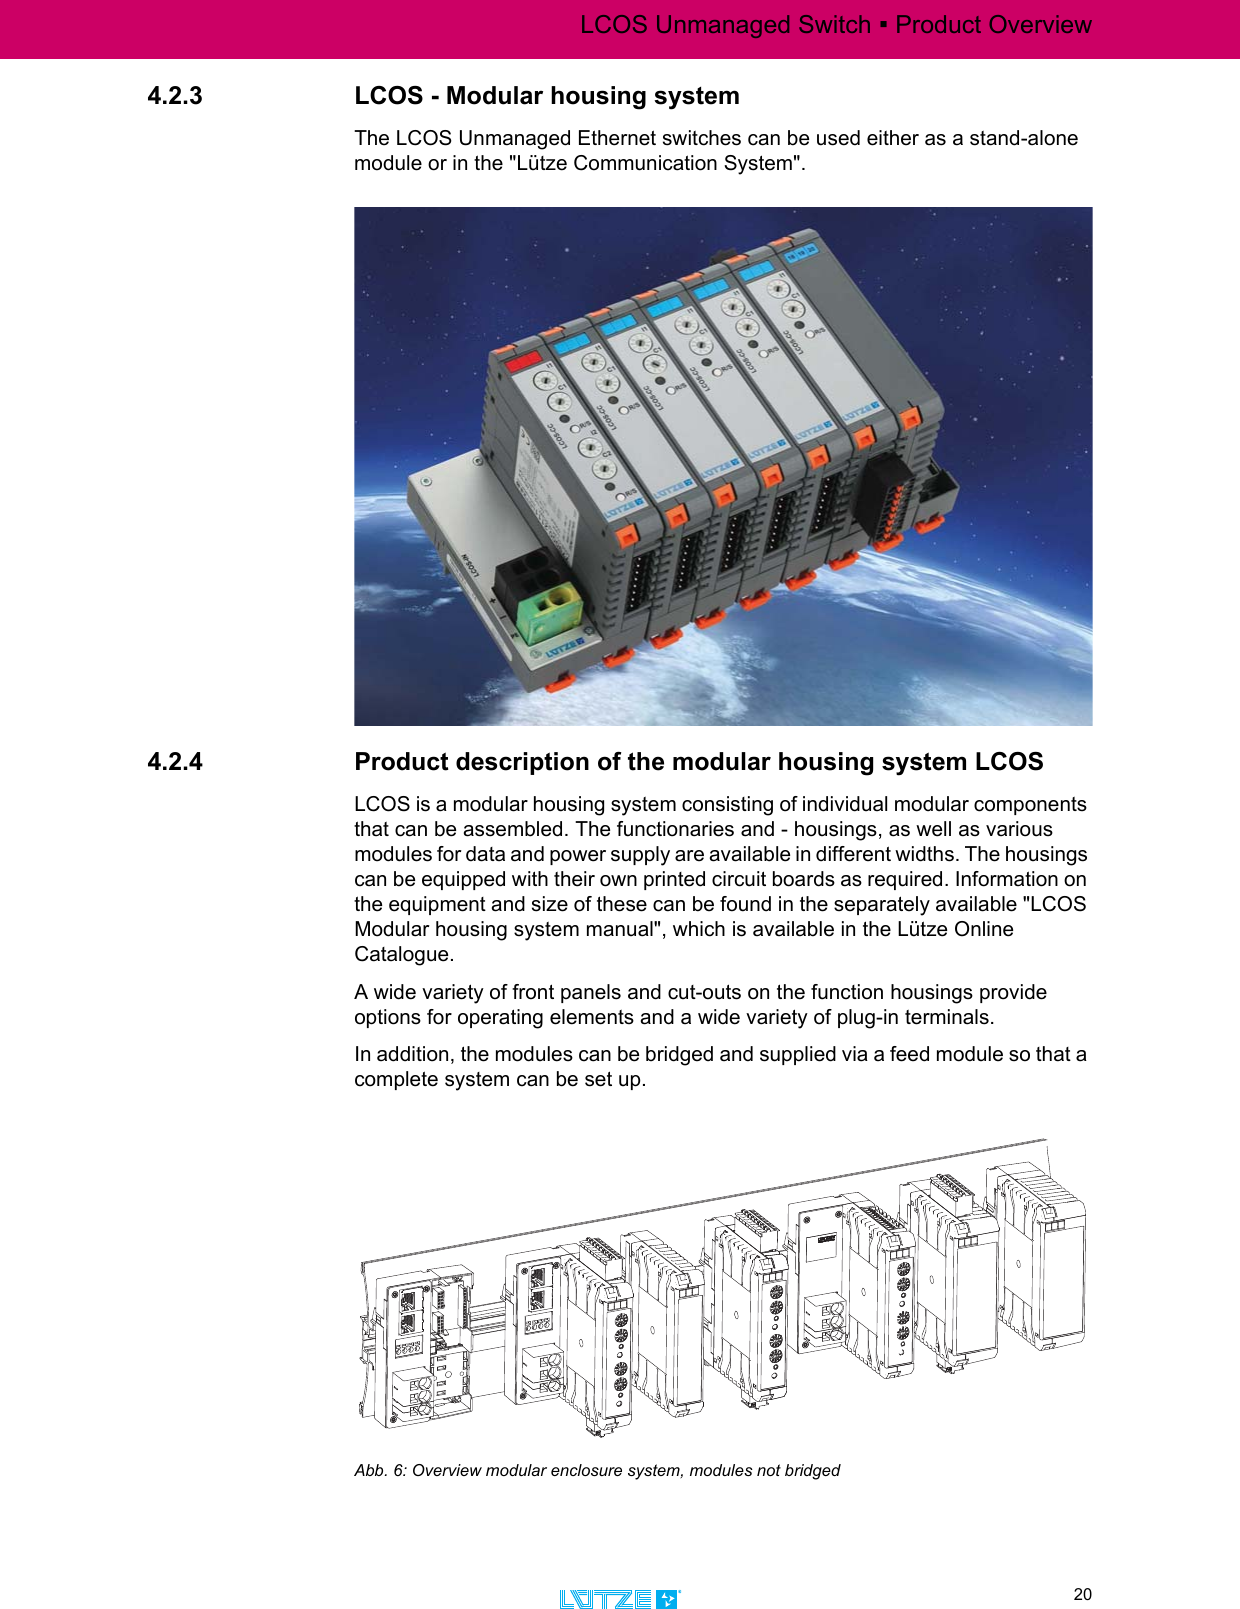 LCOS Unmanaged Switch ▪ Product Overview20TRANSPORTATION4.2.3 LCOS - Modular housing systemThe LCOS Unmanaged Ethernet switches can be used either as a stand-alone module or in the &quot;Lütze Communication System&quot;. 4.2.4 Product description of the modular housing system LCOSLCOS is a modular housing system consisting of individual modular components that can be assembled. The functionaries and - housings, as well as various modules for data and power supply are available in different widths. The housings can be equipped with their own printed circuit boards as required. Information on the equipment and size of these can be found in the separately available &quot;LCOS Modular housing system manual&quot;, which is available in the Lütze Online Catalogue.A wide variety of front panels and cut-outs on the function housings provide options for operating elements and a wide variety of plug-in terminals. In addition, the modules can be bridged and supplied via a feed module so that a complete system can be set up. Abb. 6: Overview modular enclosure system, modules not bridged